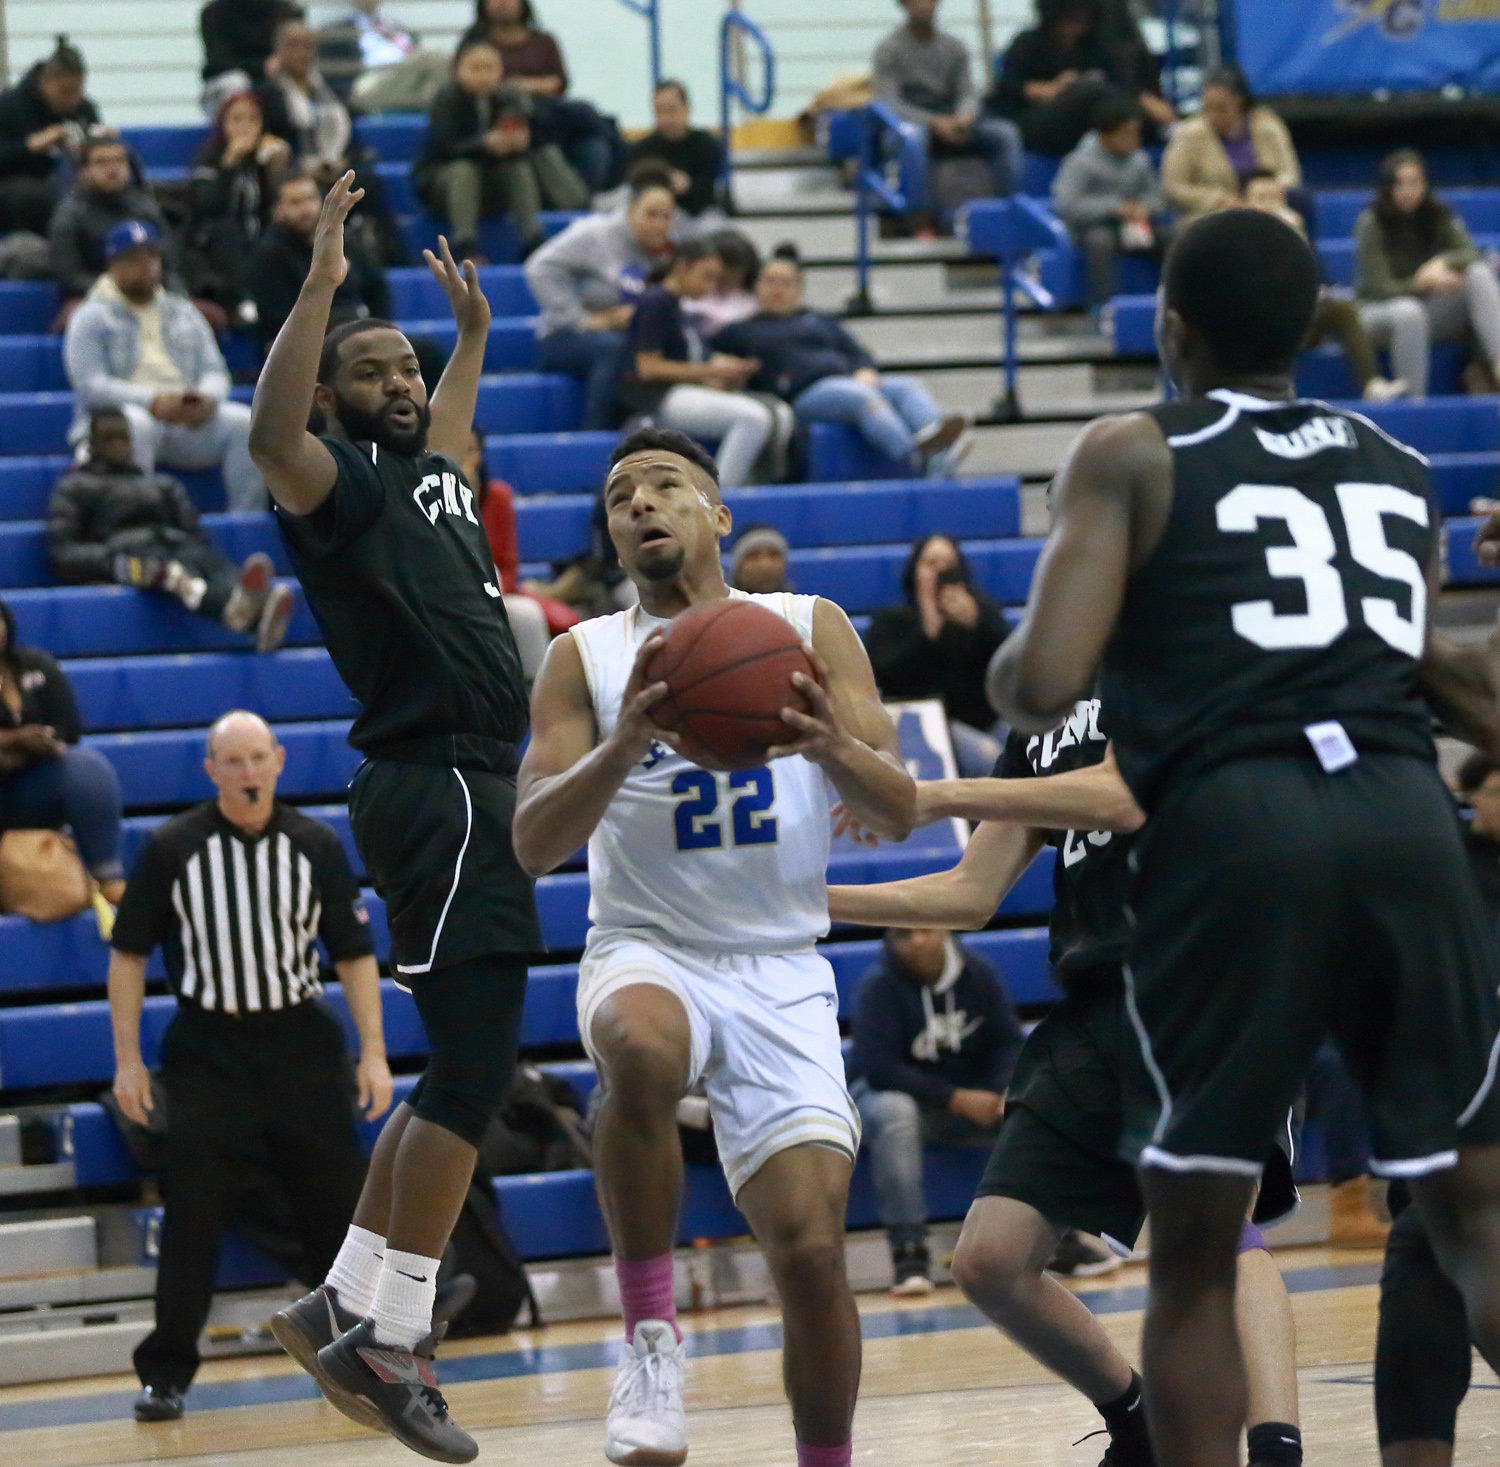 Lehman’s Tommy Batista scored a combined 32 points in the Lightning’s two victories last week, including a 22-point outing in a playoff win over Medgar Evers.